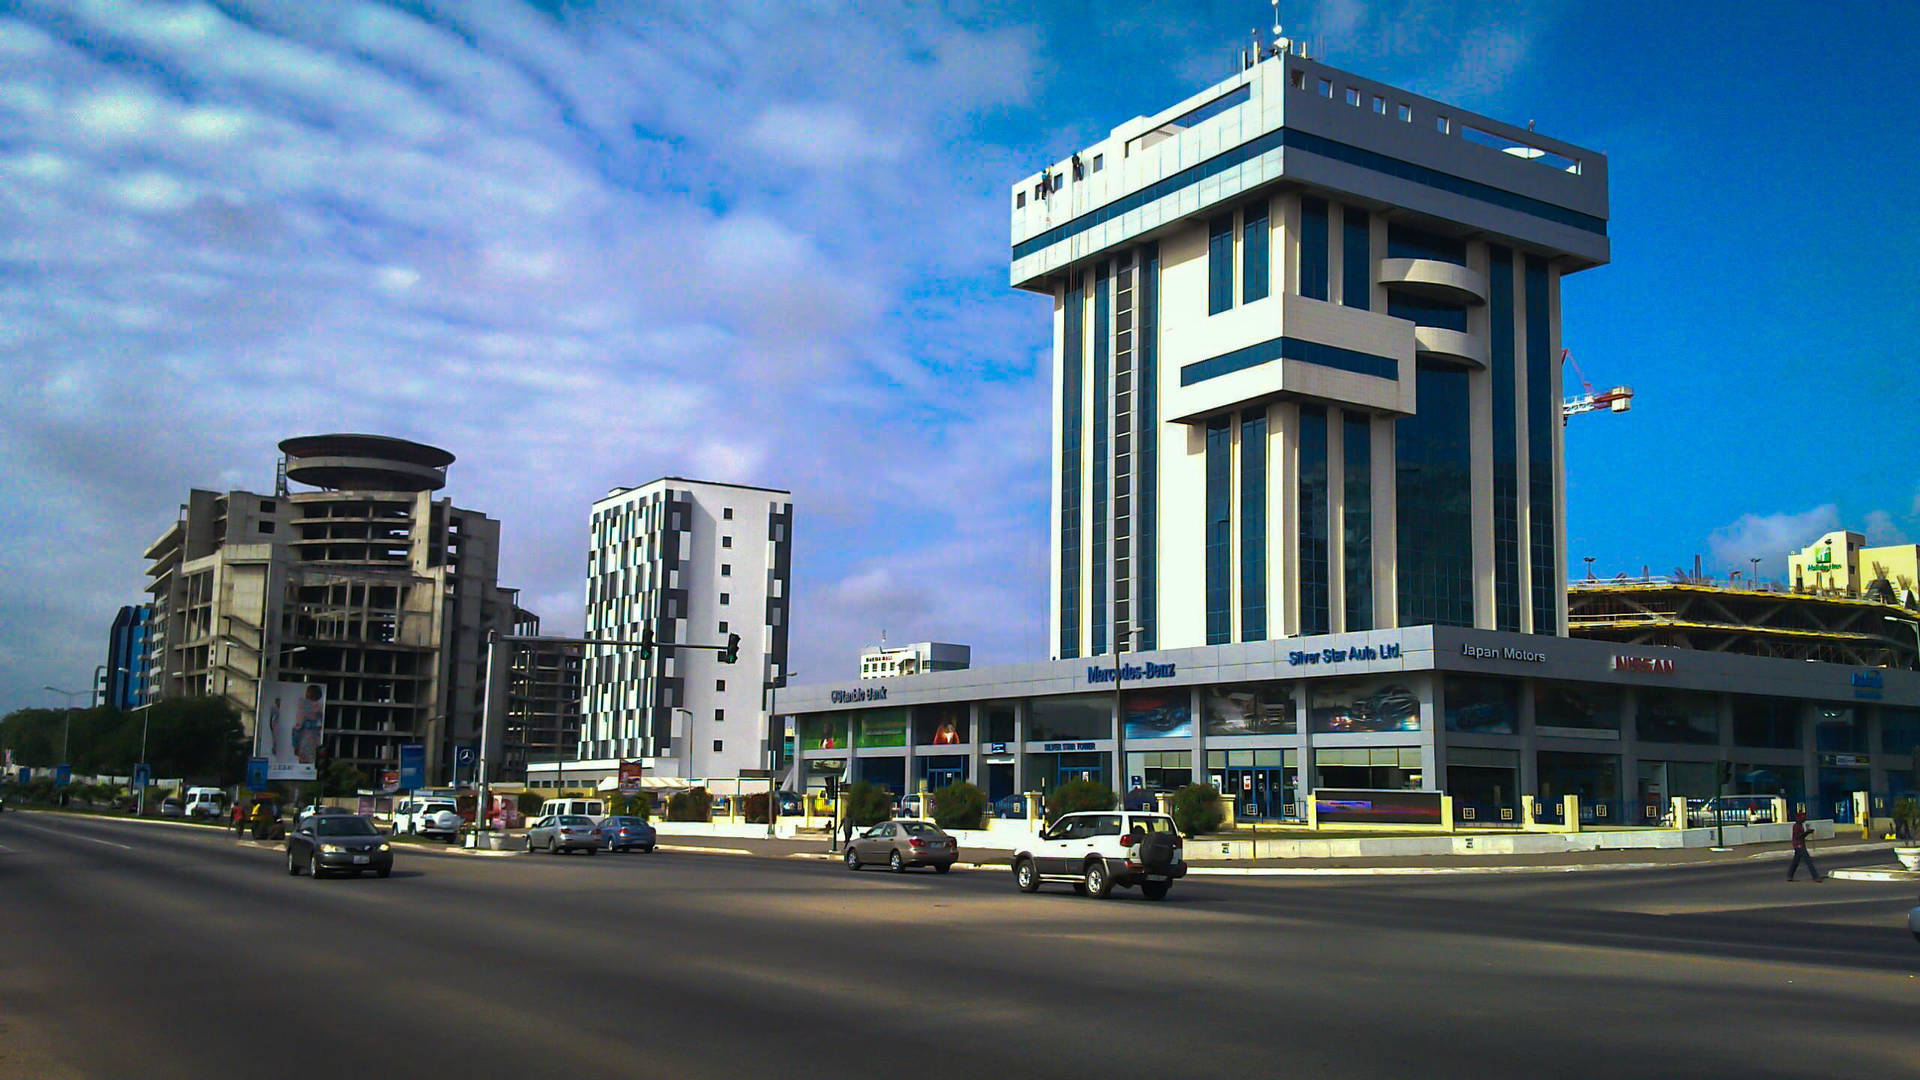 Ghana Accra Business District